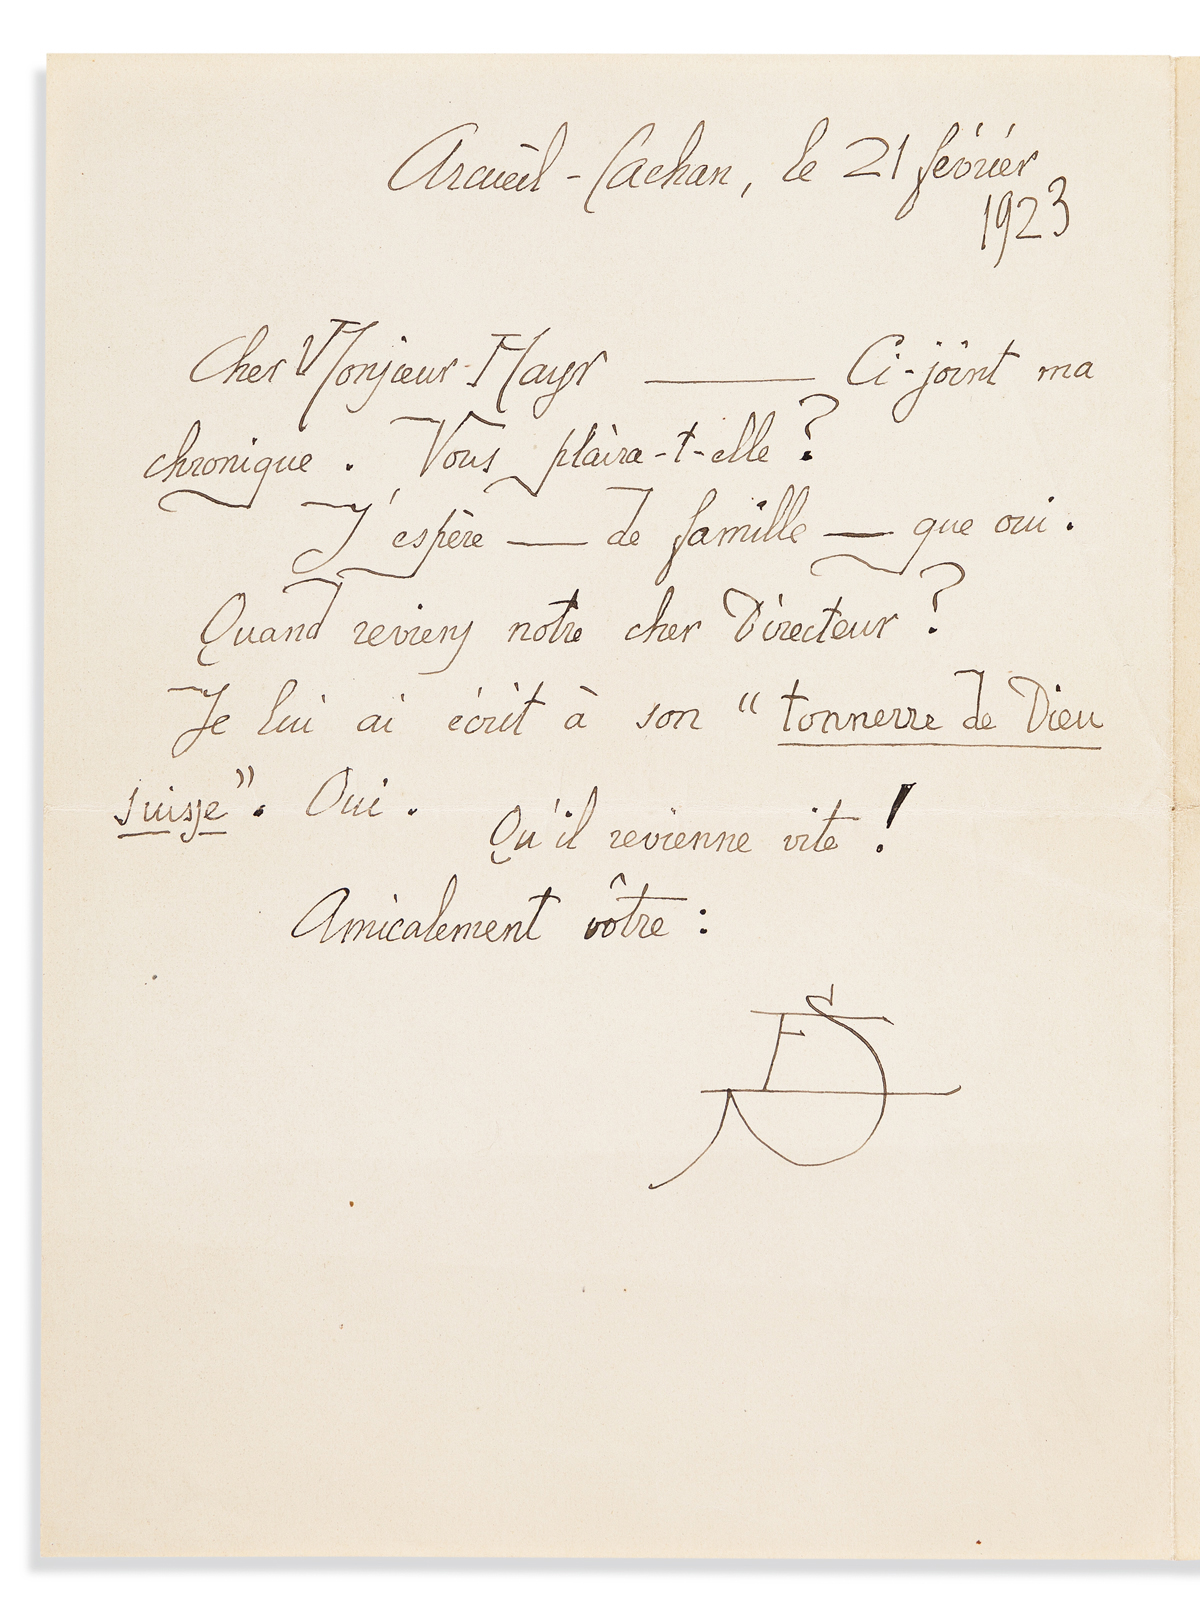 SATIE, ERIK. Autograph Letter Signed, with his monogram (ES), to editor of Les Feuilles libres Wieland Mayr (Dear Mr. Mayr), in Fre